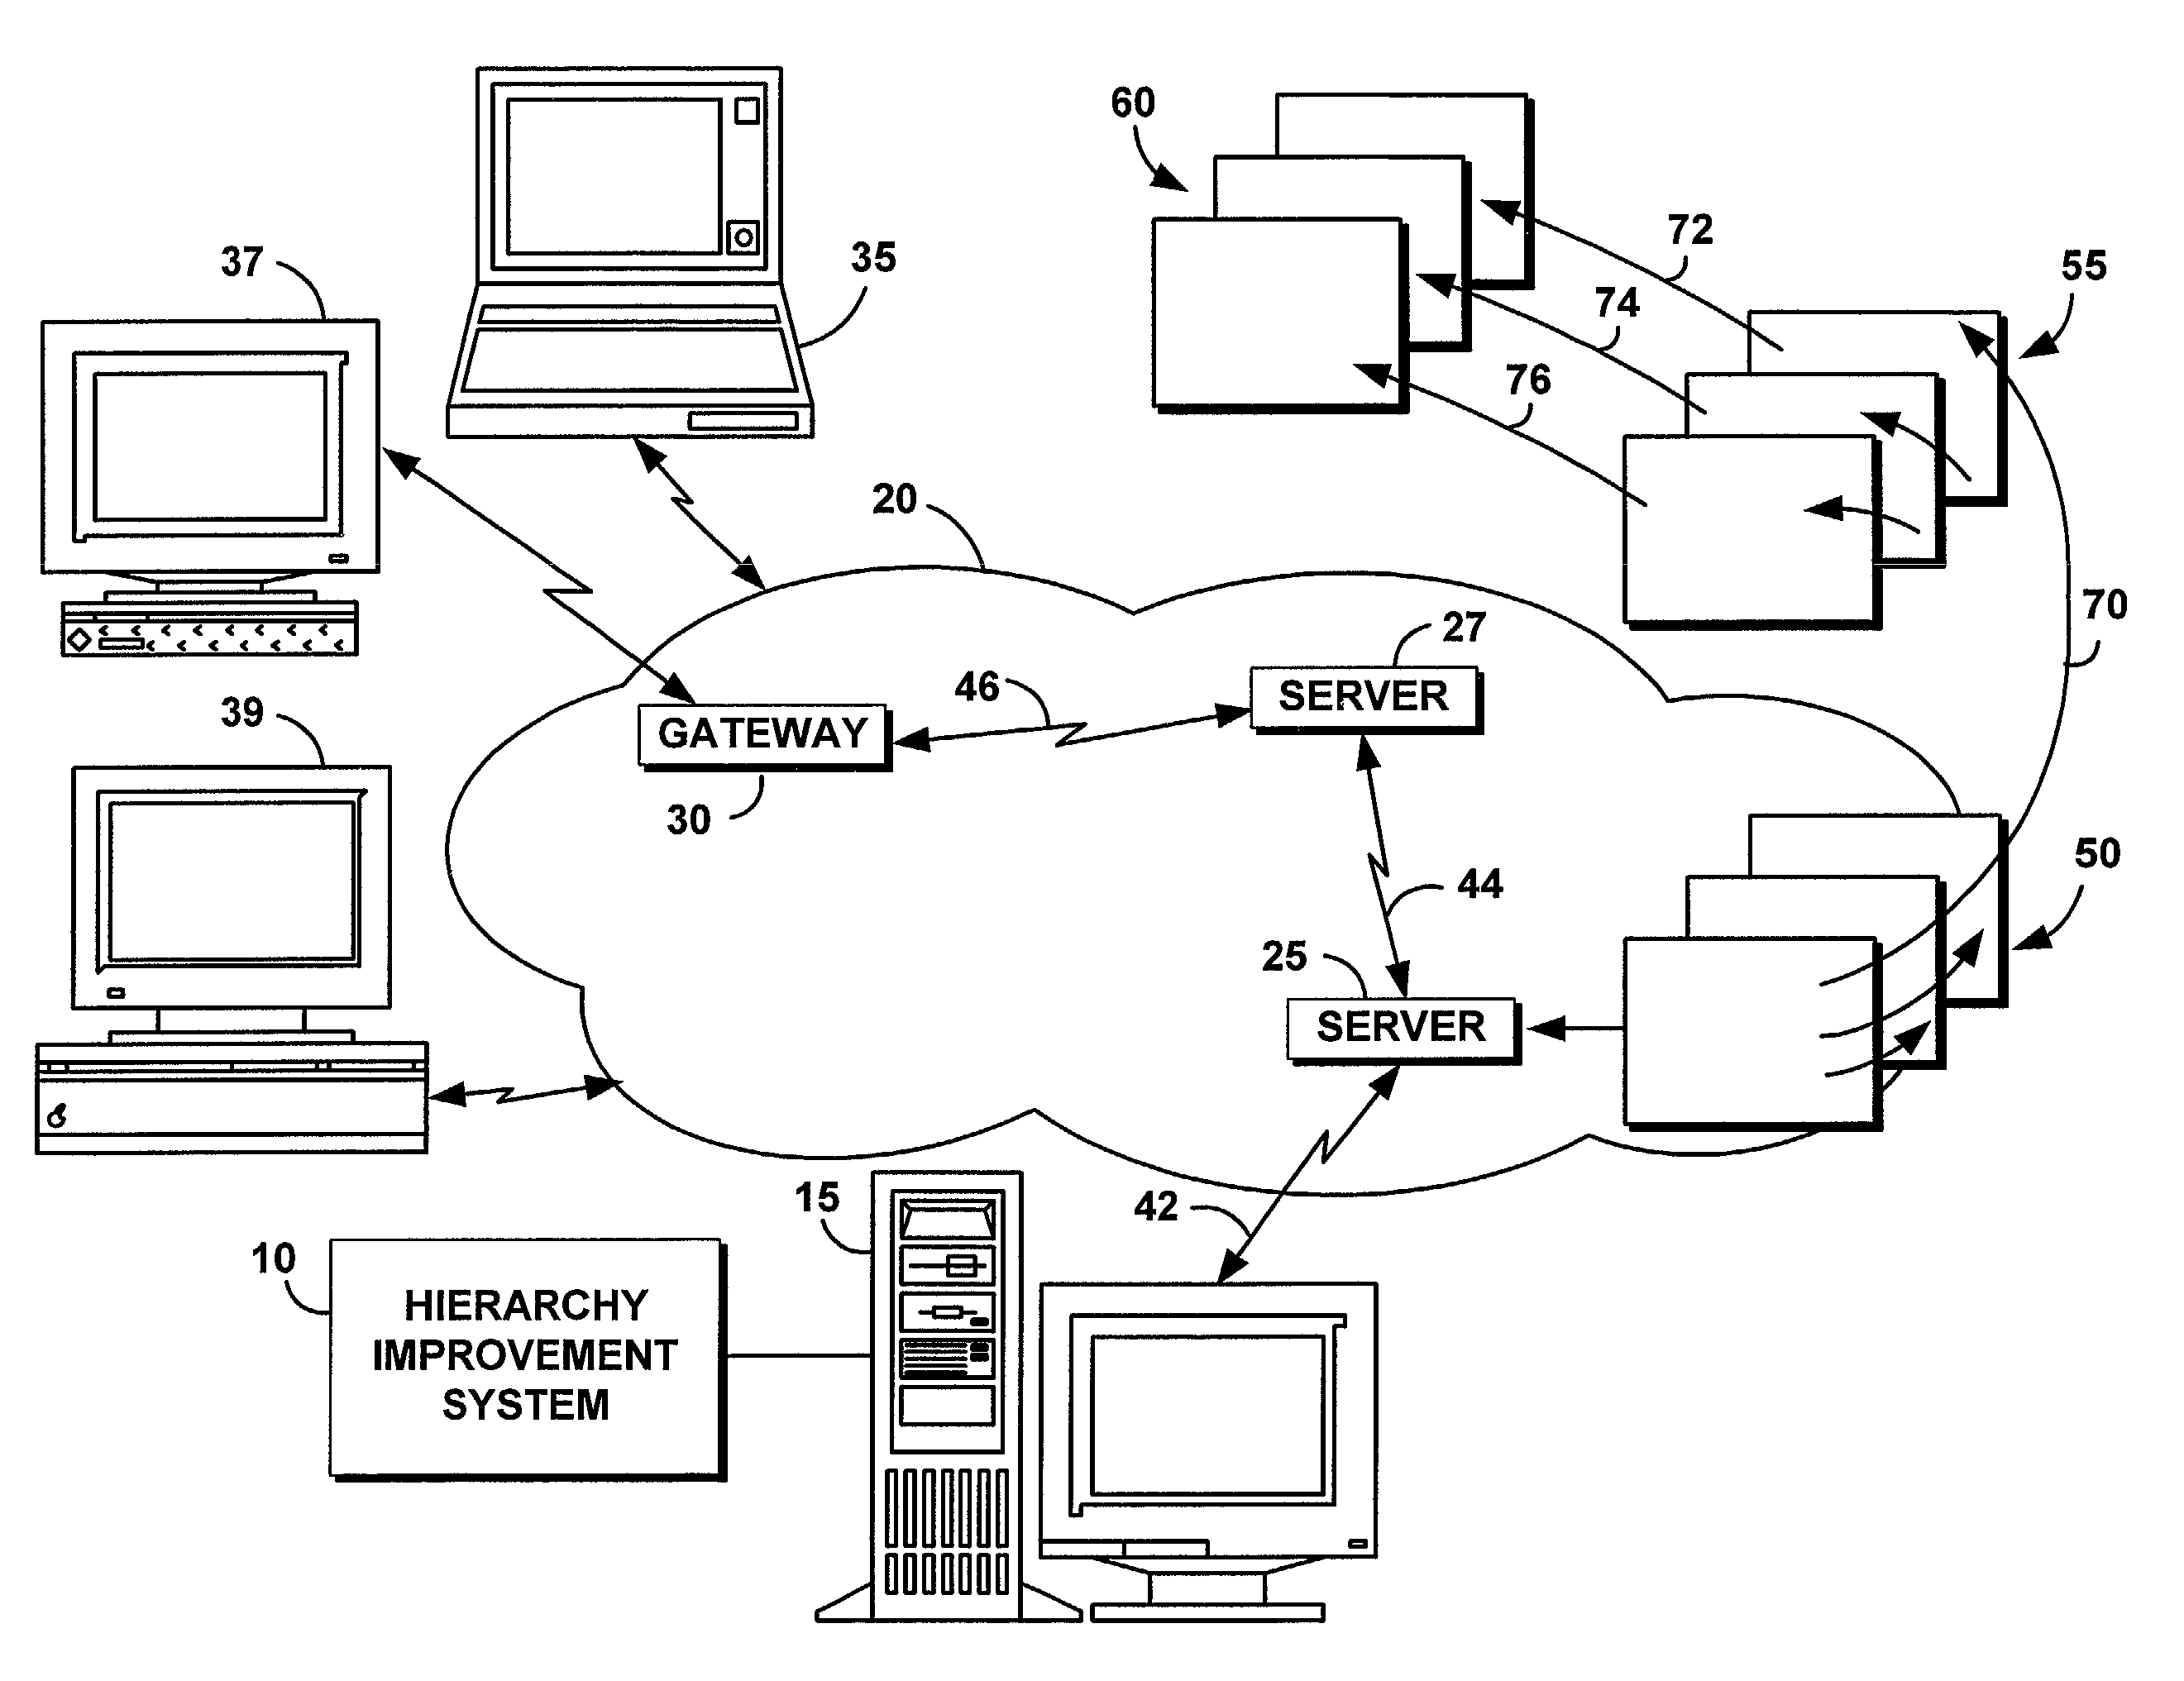 Method and system for using access patterns to improve web site hierarchy and organization